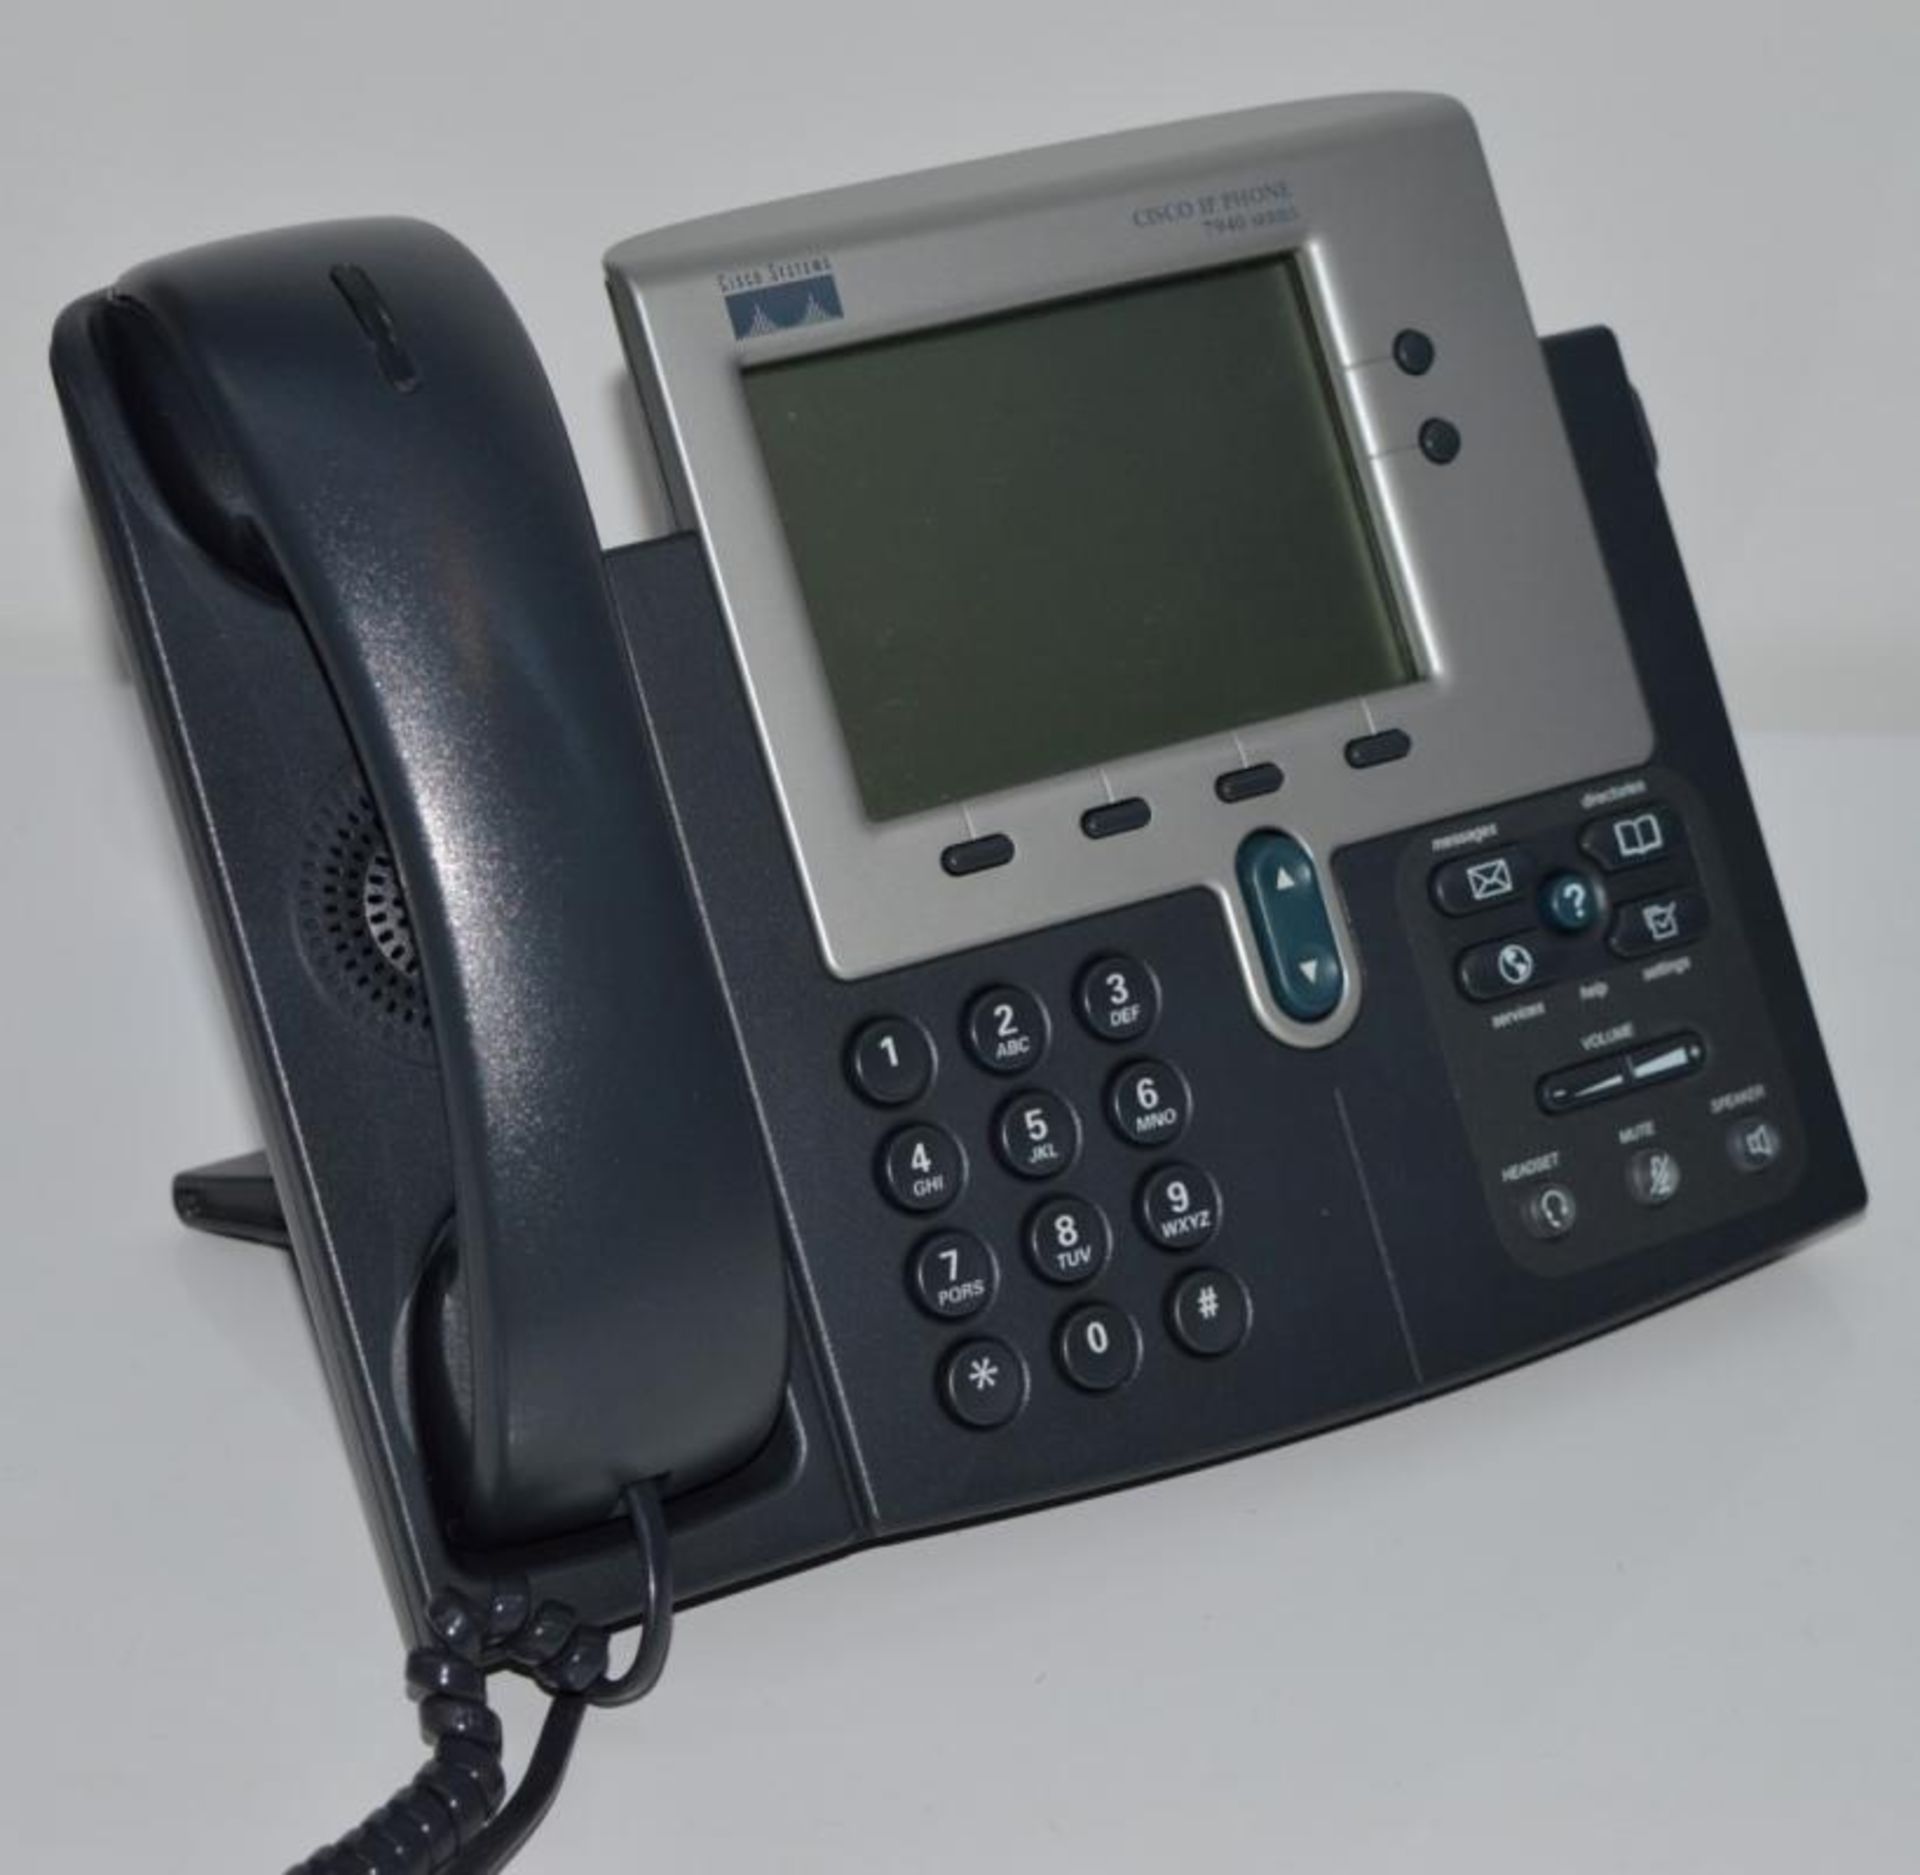 4 x Cisco CP-7940G IP Phone VOIP Telephone LCD Display Phones - Removed From a Working Office Enviro - Image 6 of 6